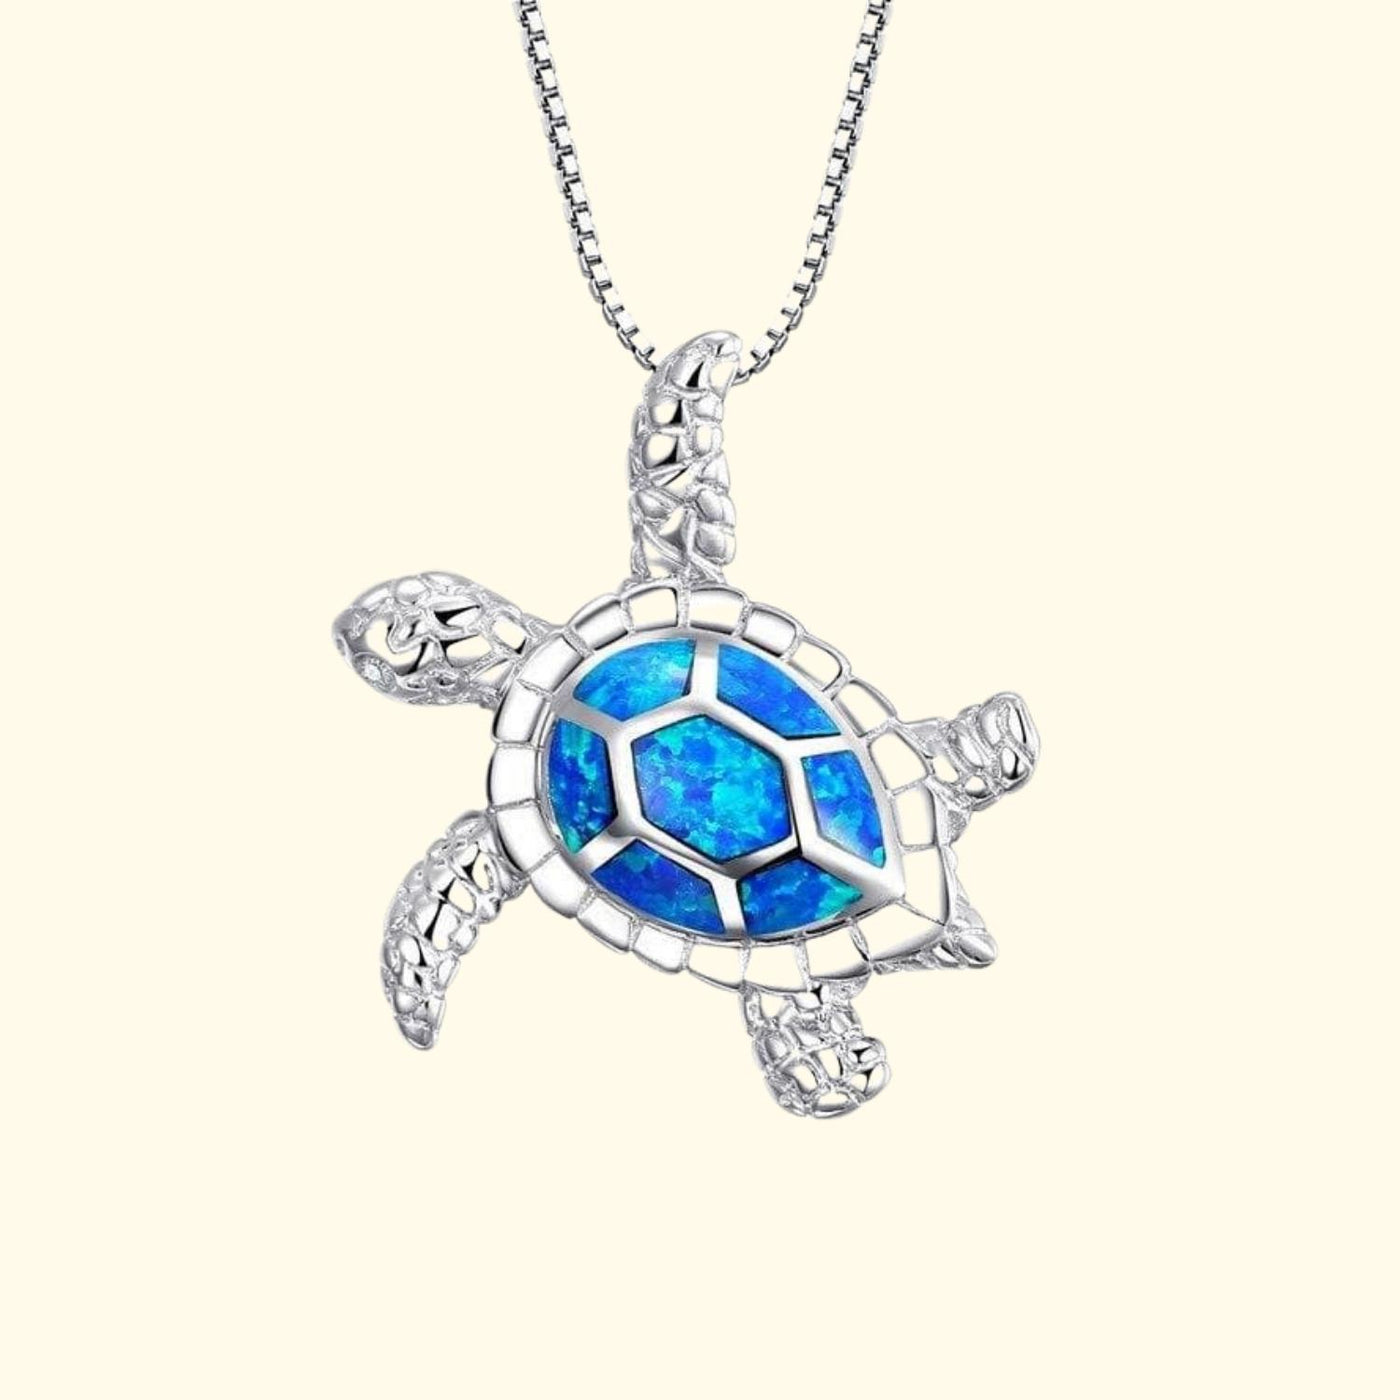 Save a Turtle Necklace